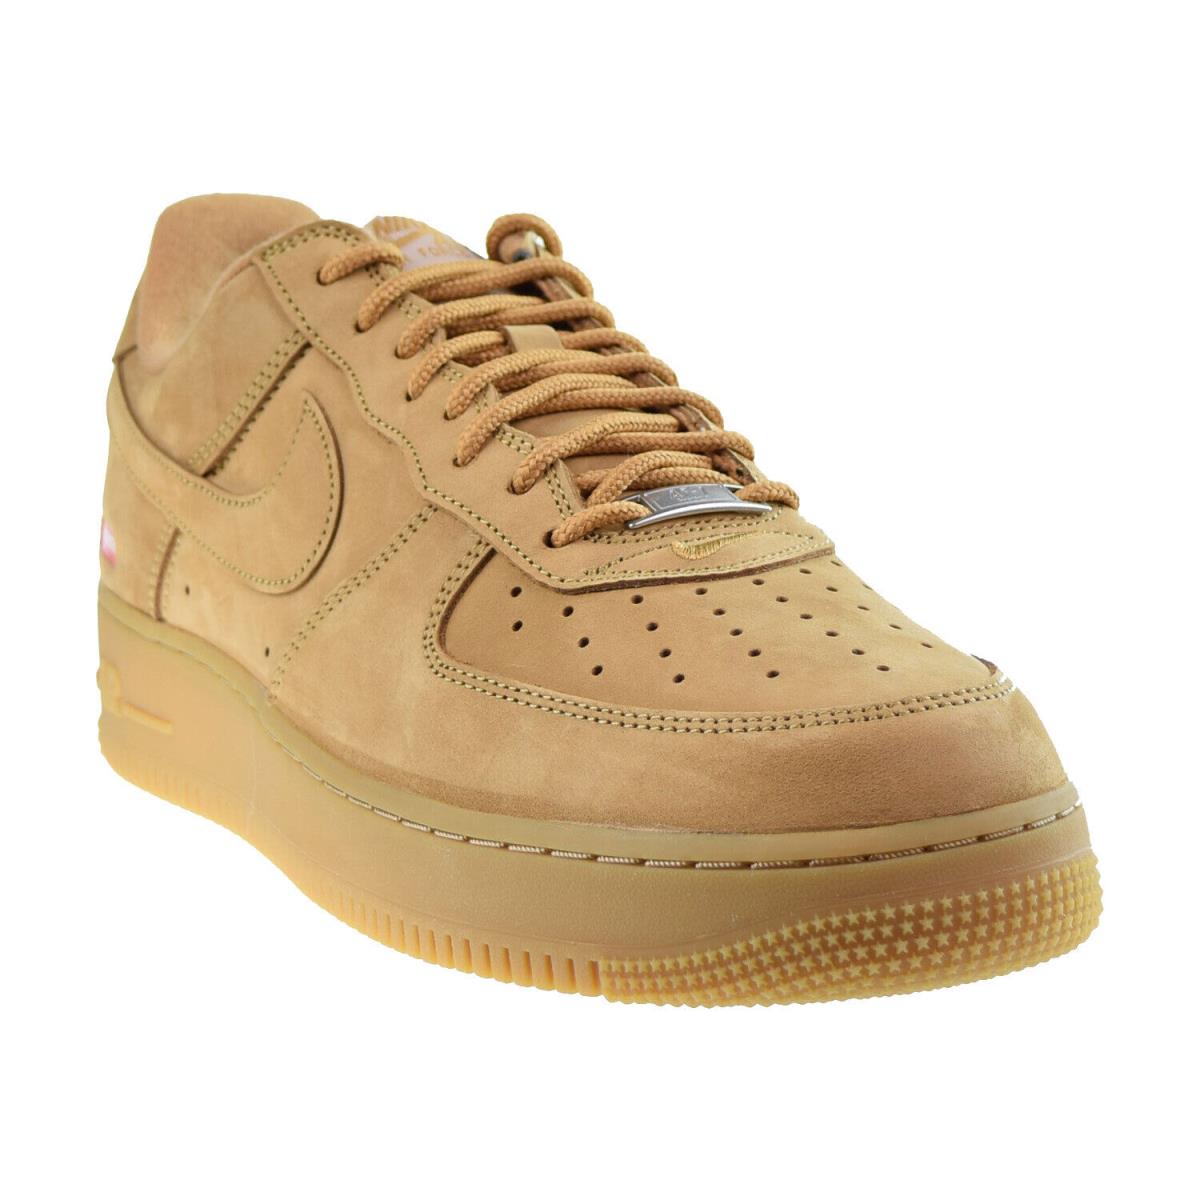 Nike Supreme x Air Force 1 Low SP Men`s Shoes Wheat DN1555-200 - Wheat